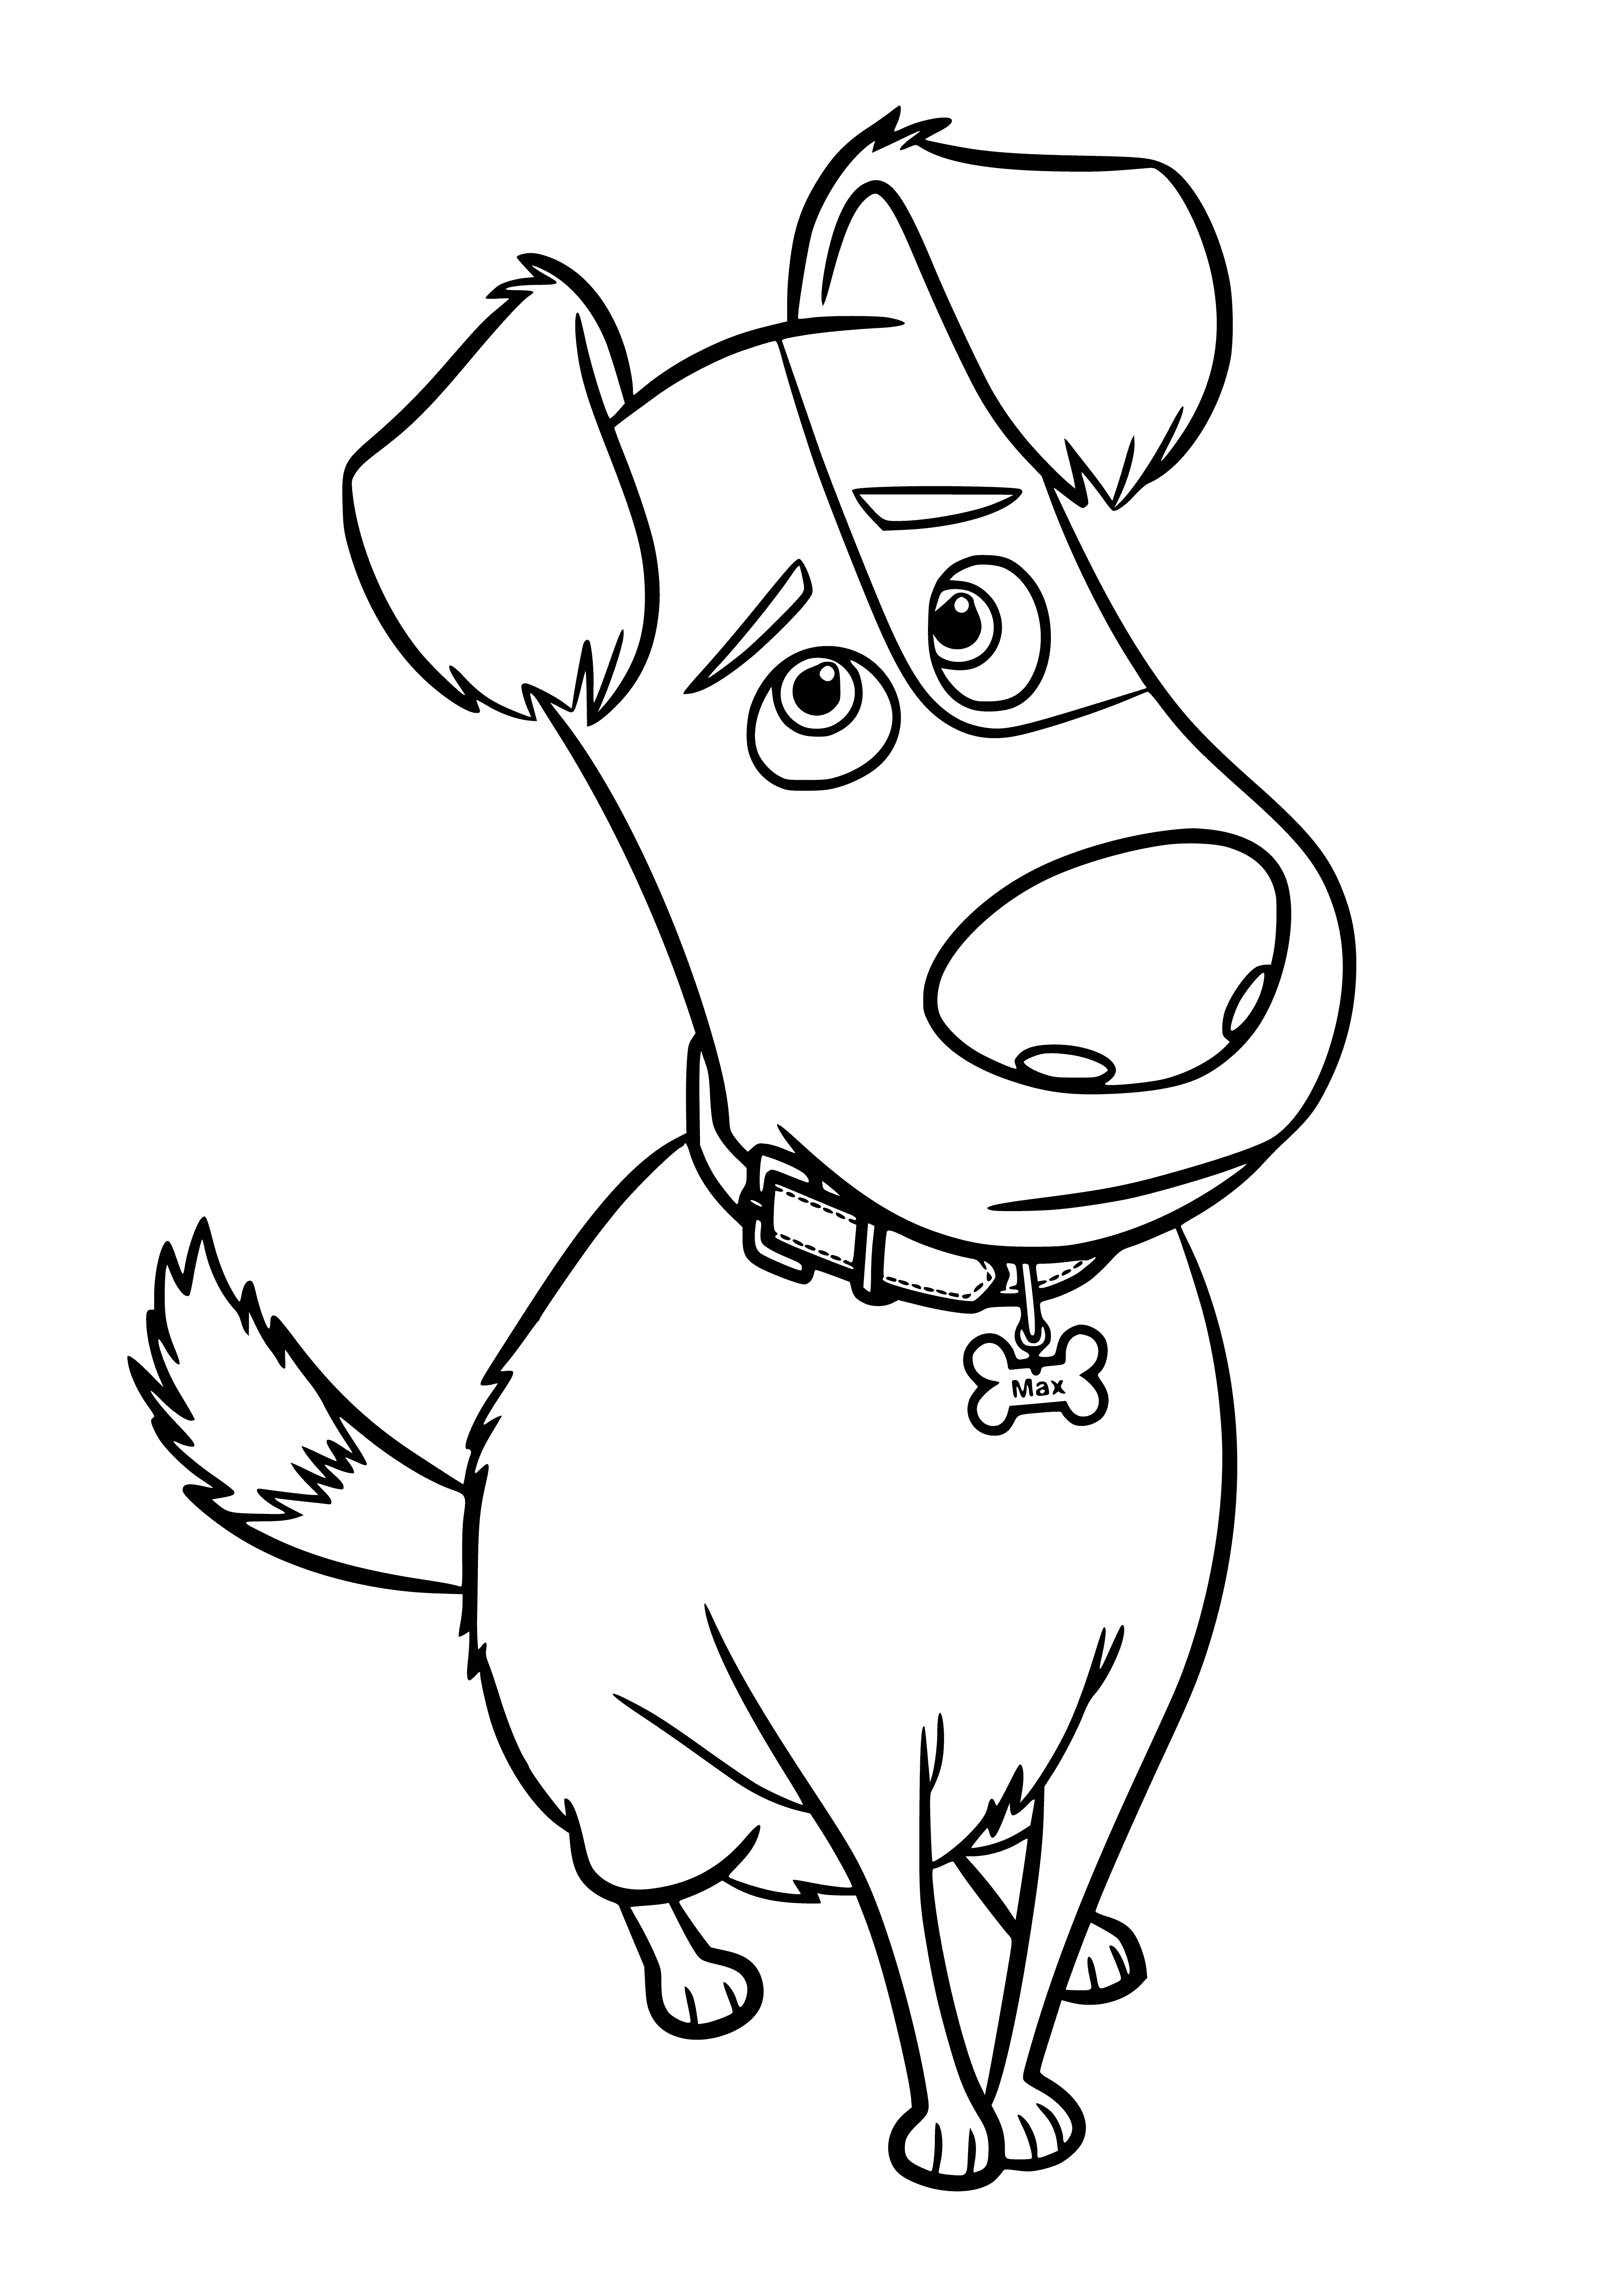 Terrier Max coloring page